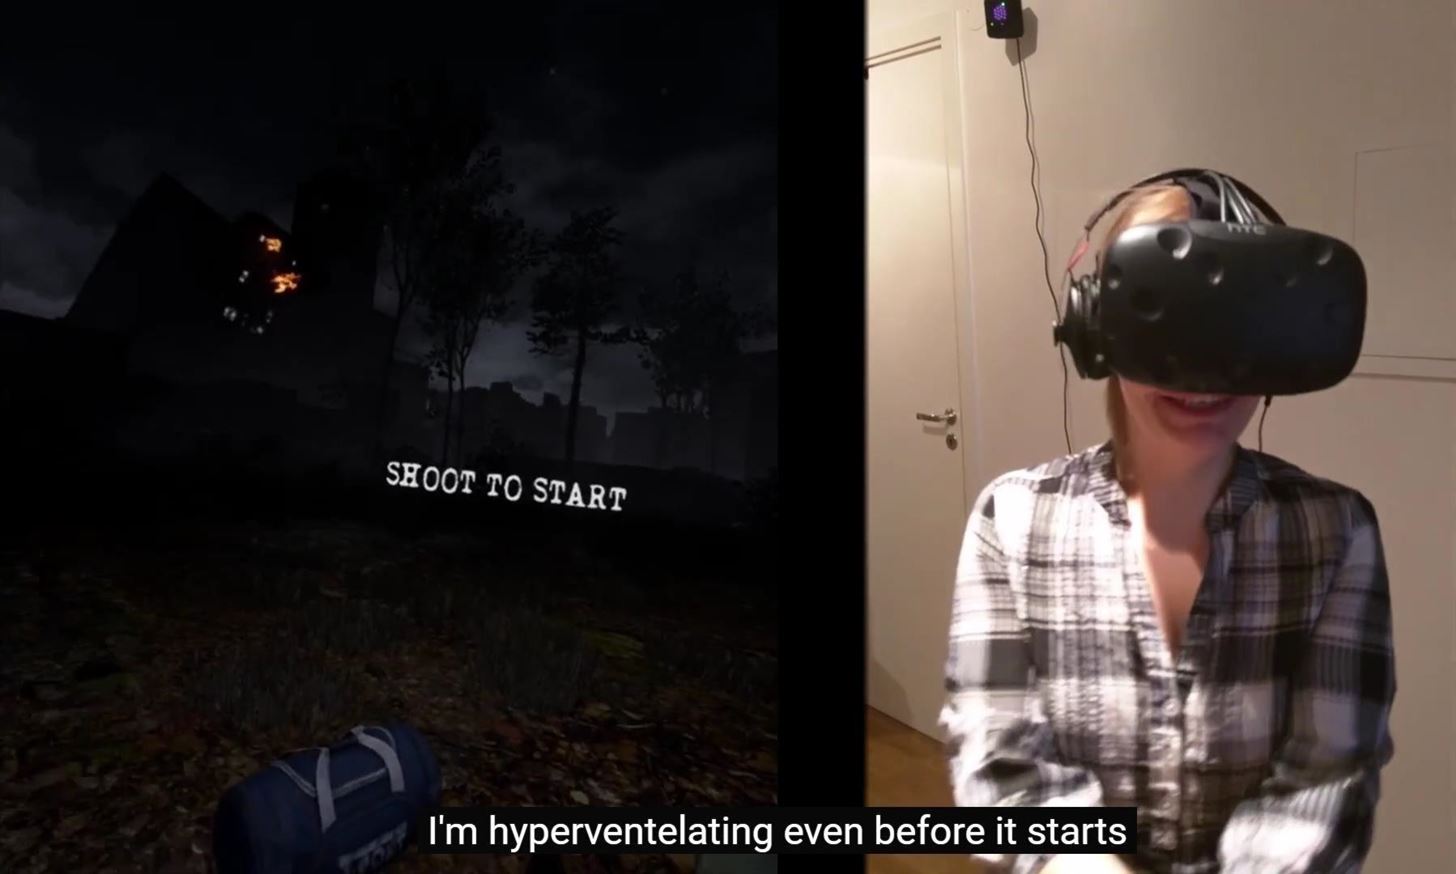 Watch This Woman Freak the Hell Out in Horror VR